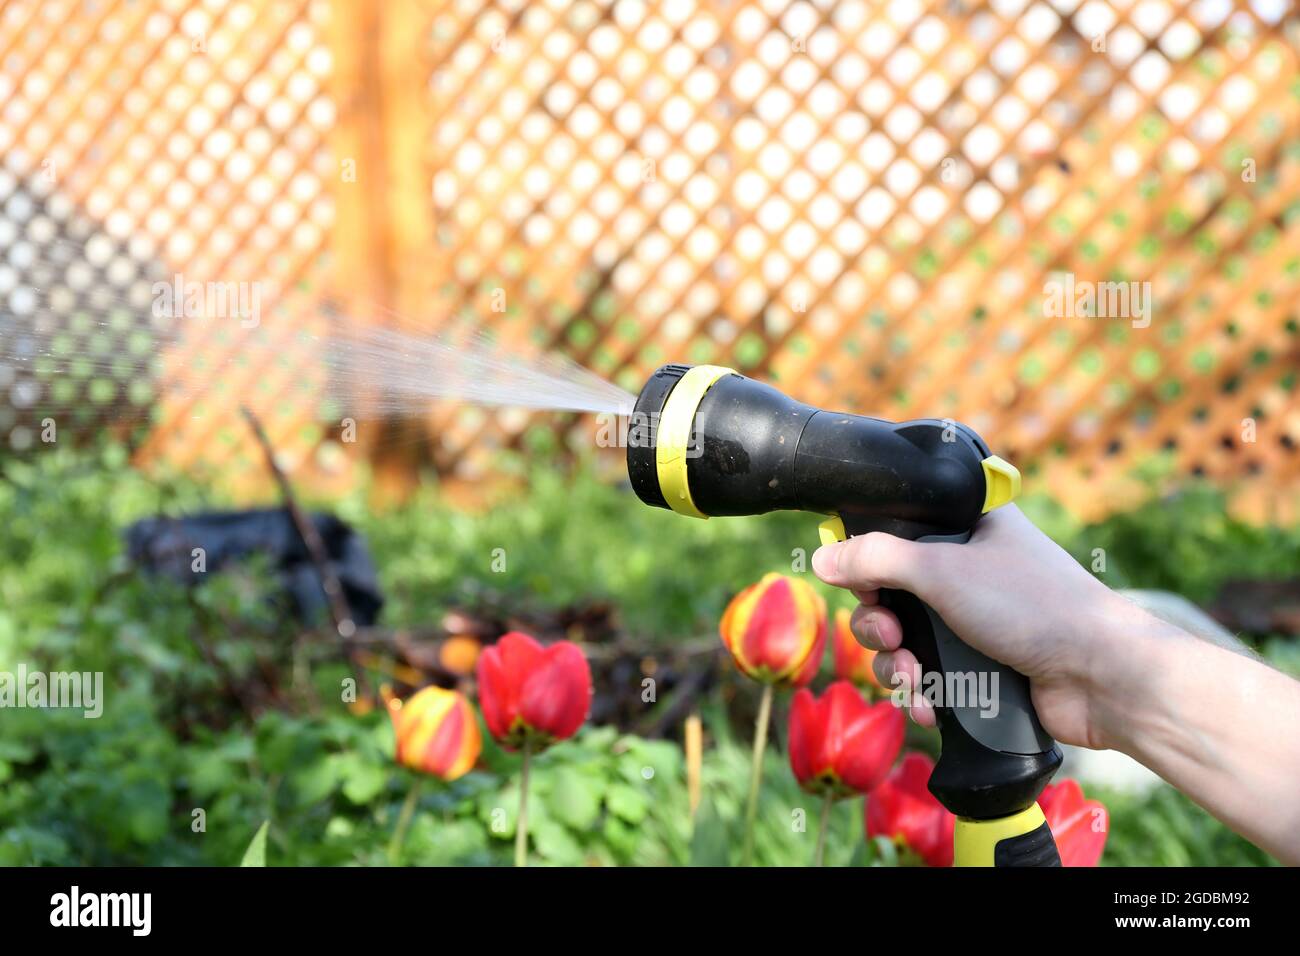 Page 9 - Hand Holding Garden Hose High Resolution Stock Photography and  Images - Alamy